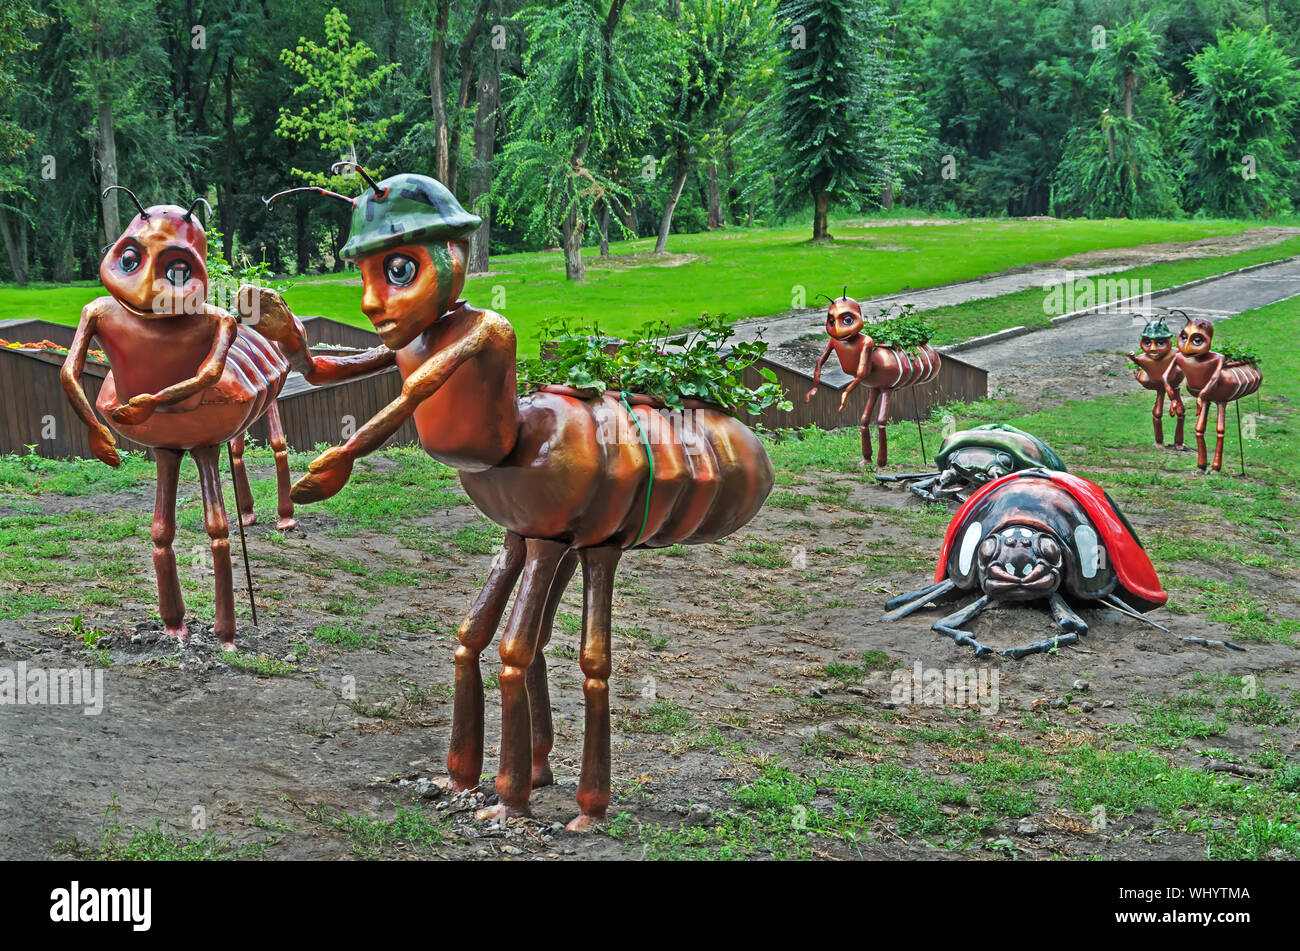 Sculpture of beetles and ants installed in a clearing under the trees as decoration in the city amusement park Stock Photo